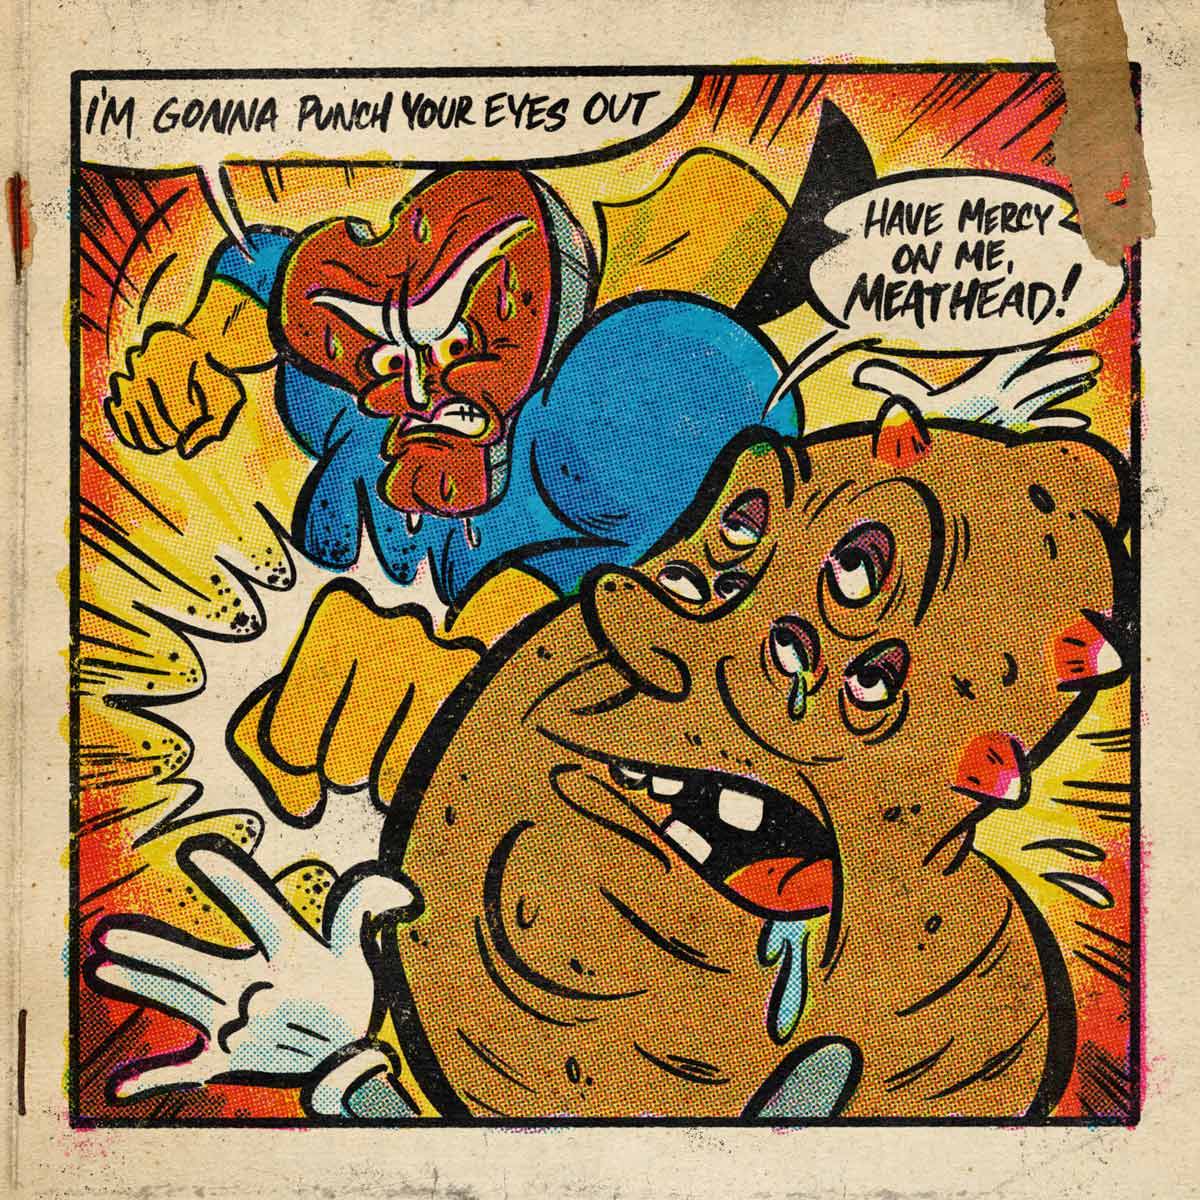 Complete illustration of comic panel with ink, colors, and textures.